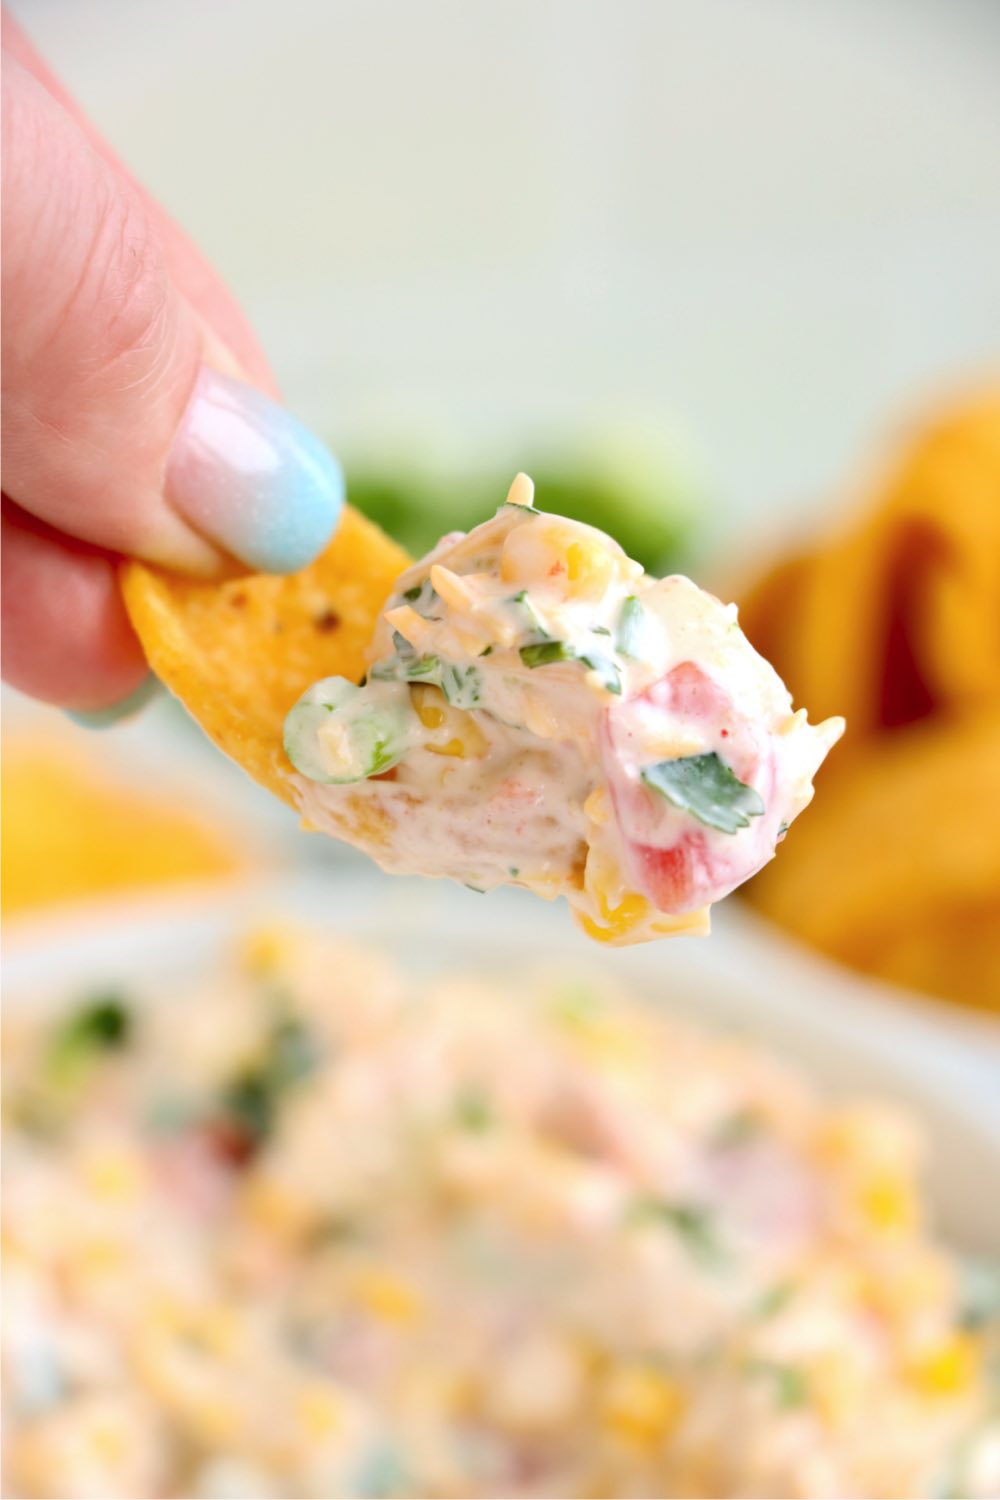 Corn chip topped with corn dip